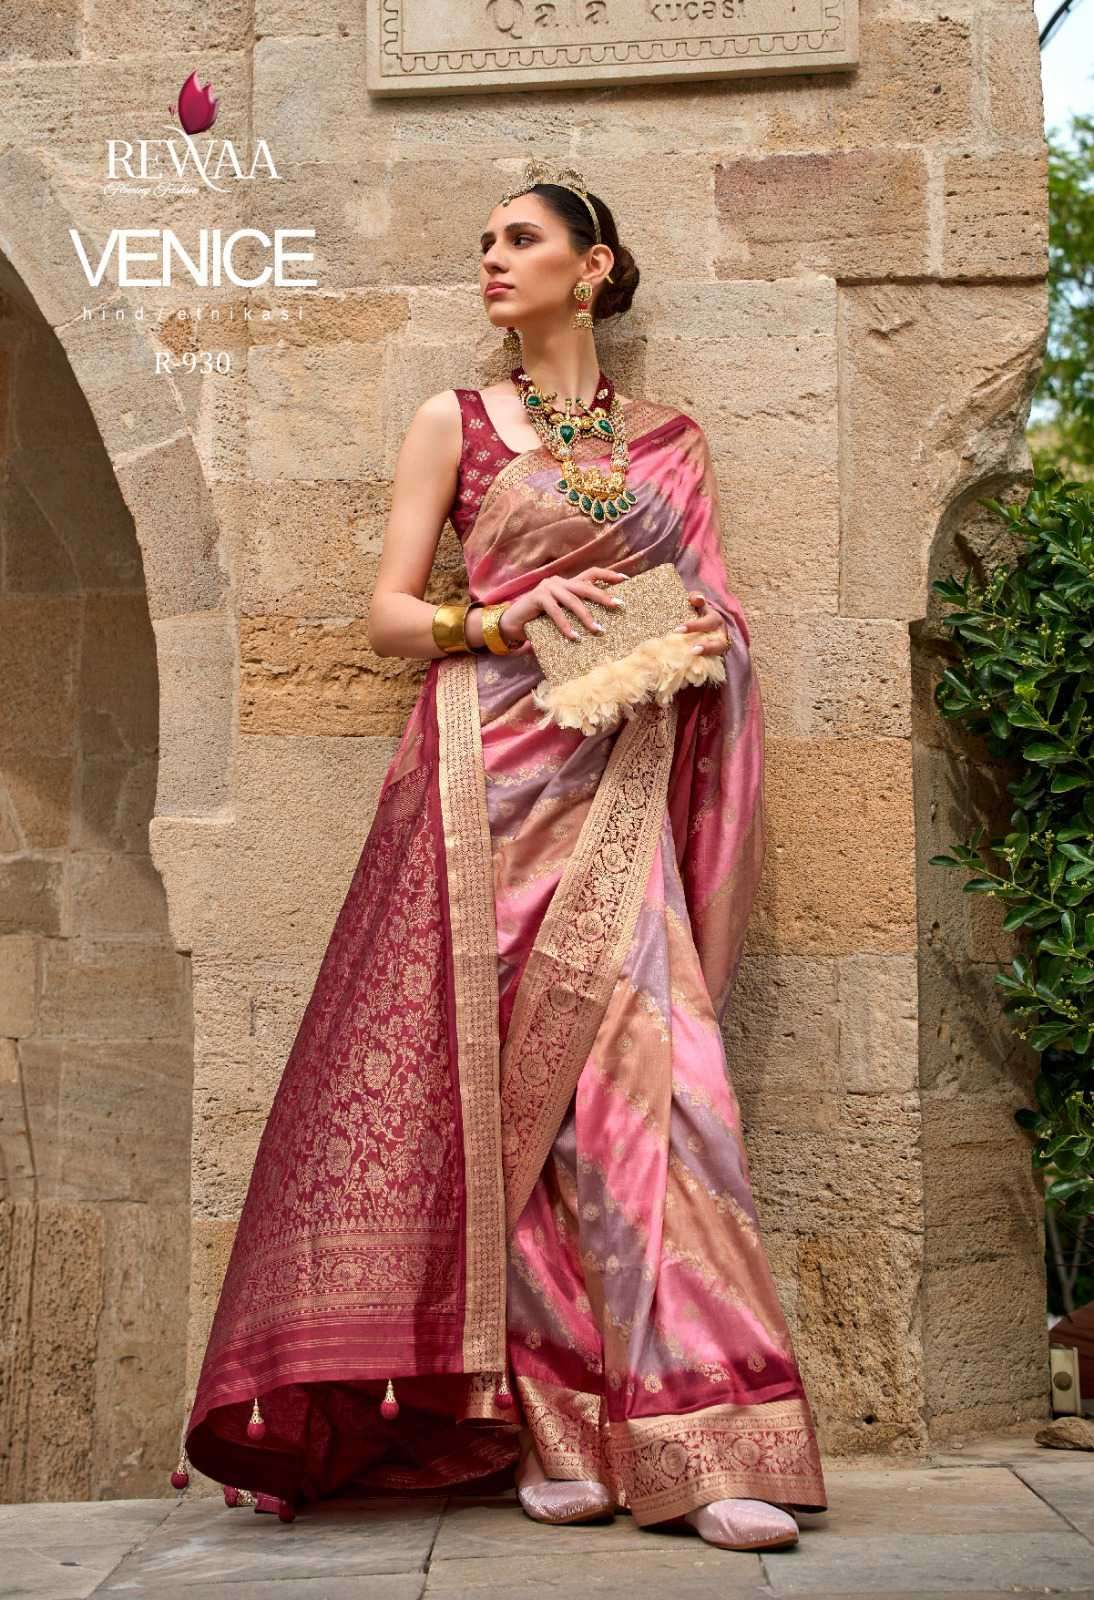 Rewaa Venice 930 To 939 Designer Traditional Wear Saree New Collection